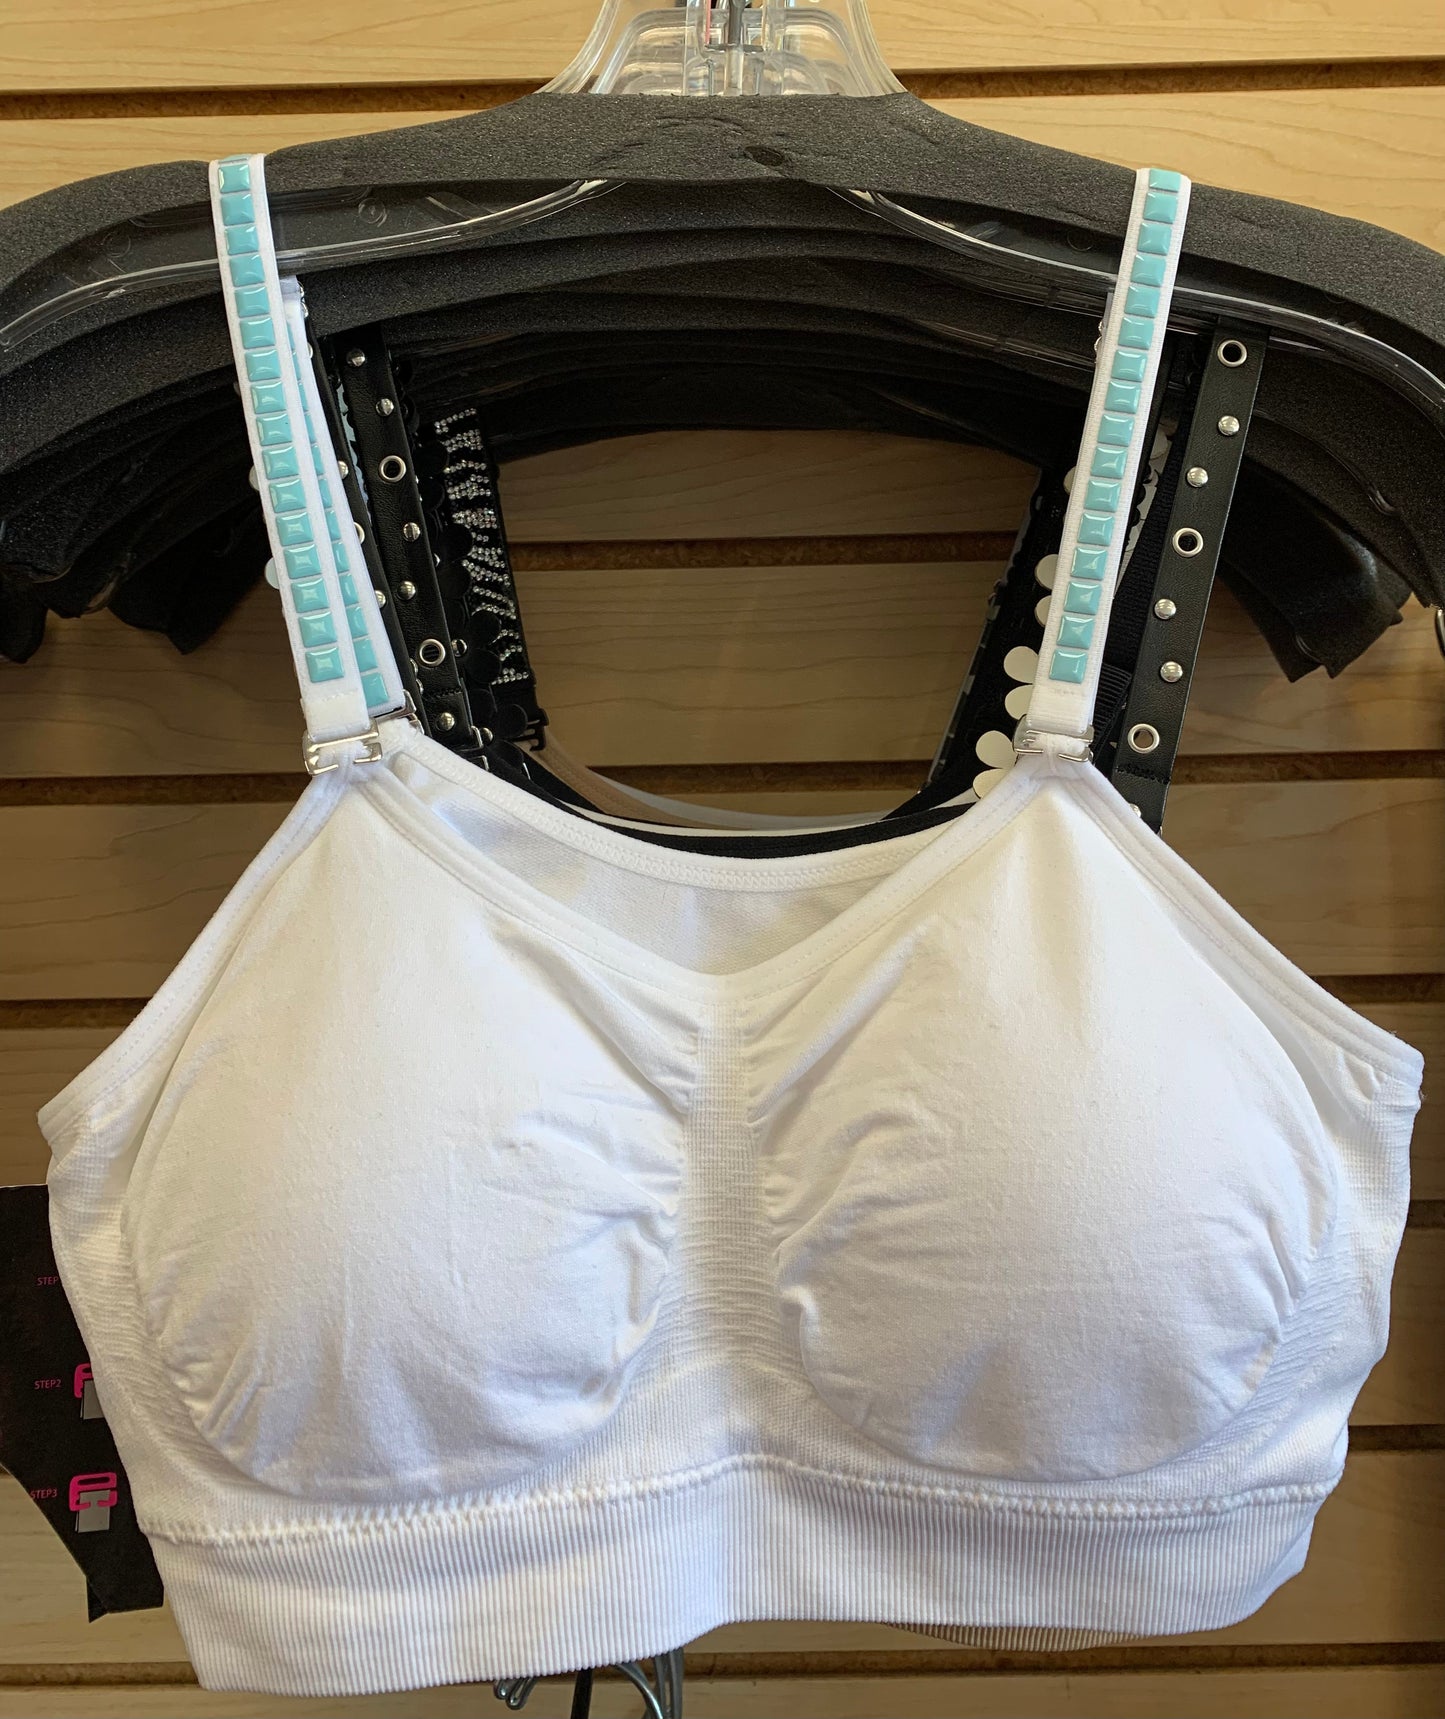 TOP SELLER, RESTOCKED AGAIN! Strap It bras with interchangeable straps & NEW PLUNGE BRA STYLE...click Strap It bras tab to see attached strap options and also